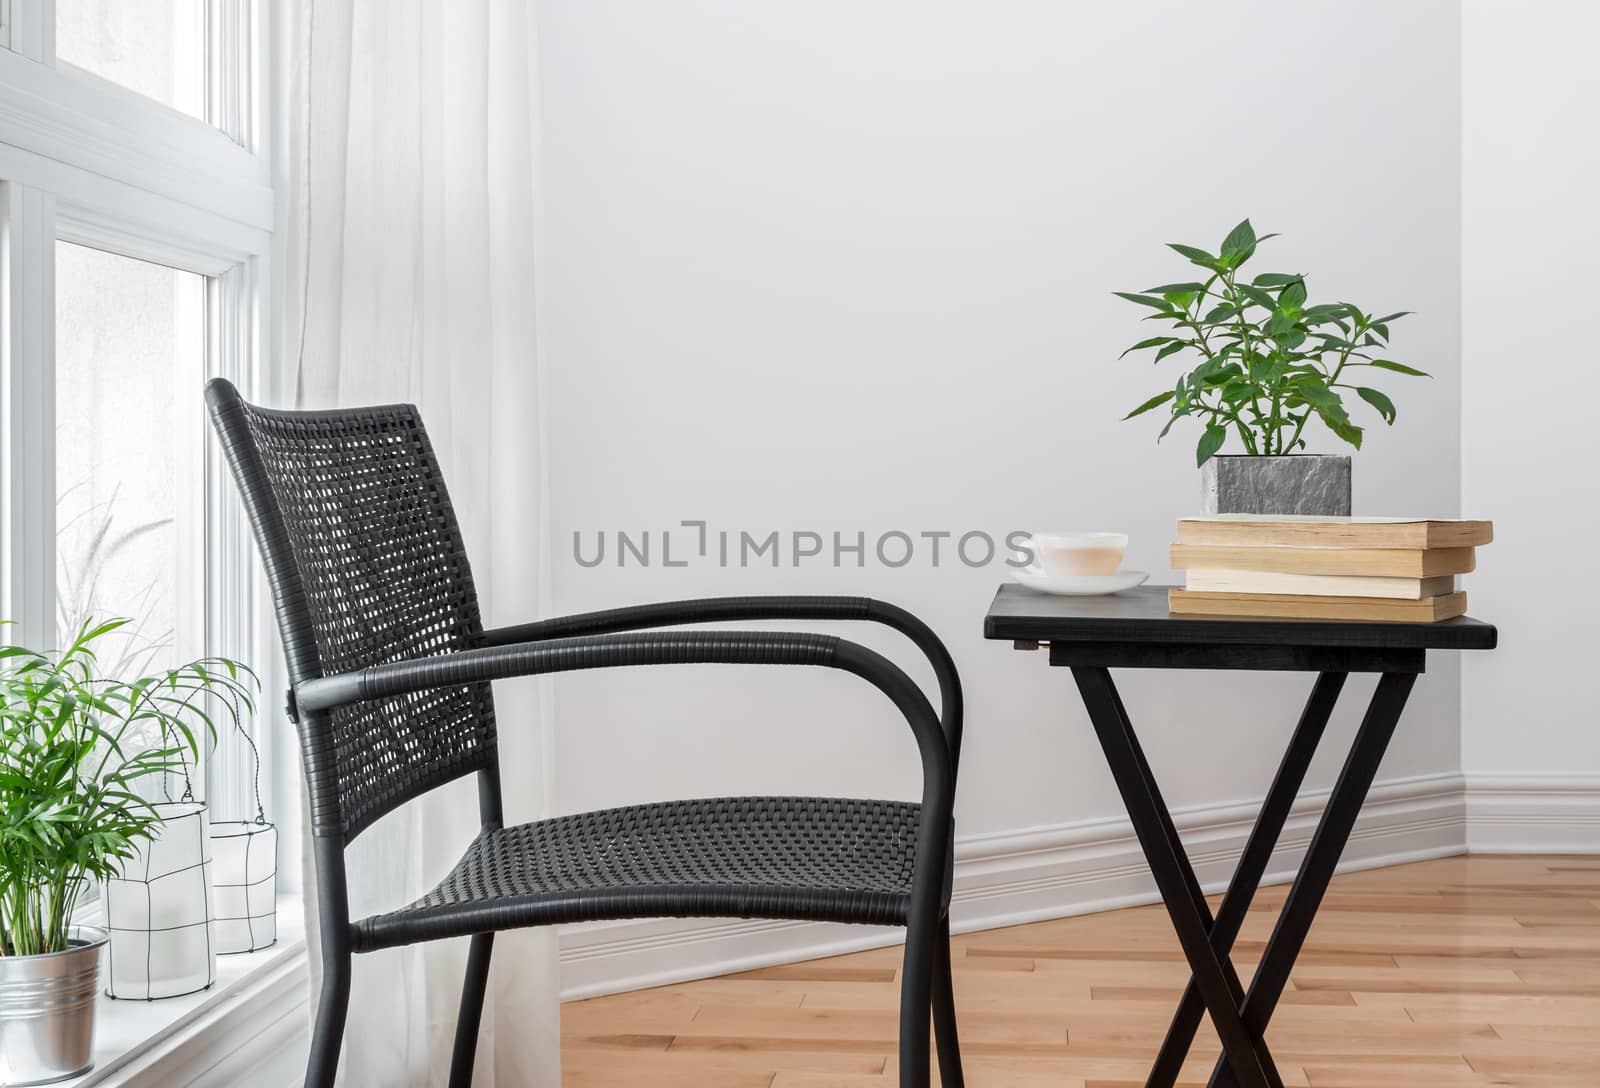 Room with black chair and table, decorated with plants.